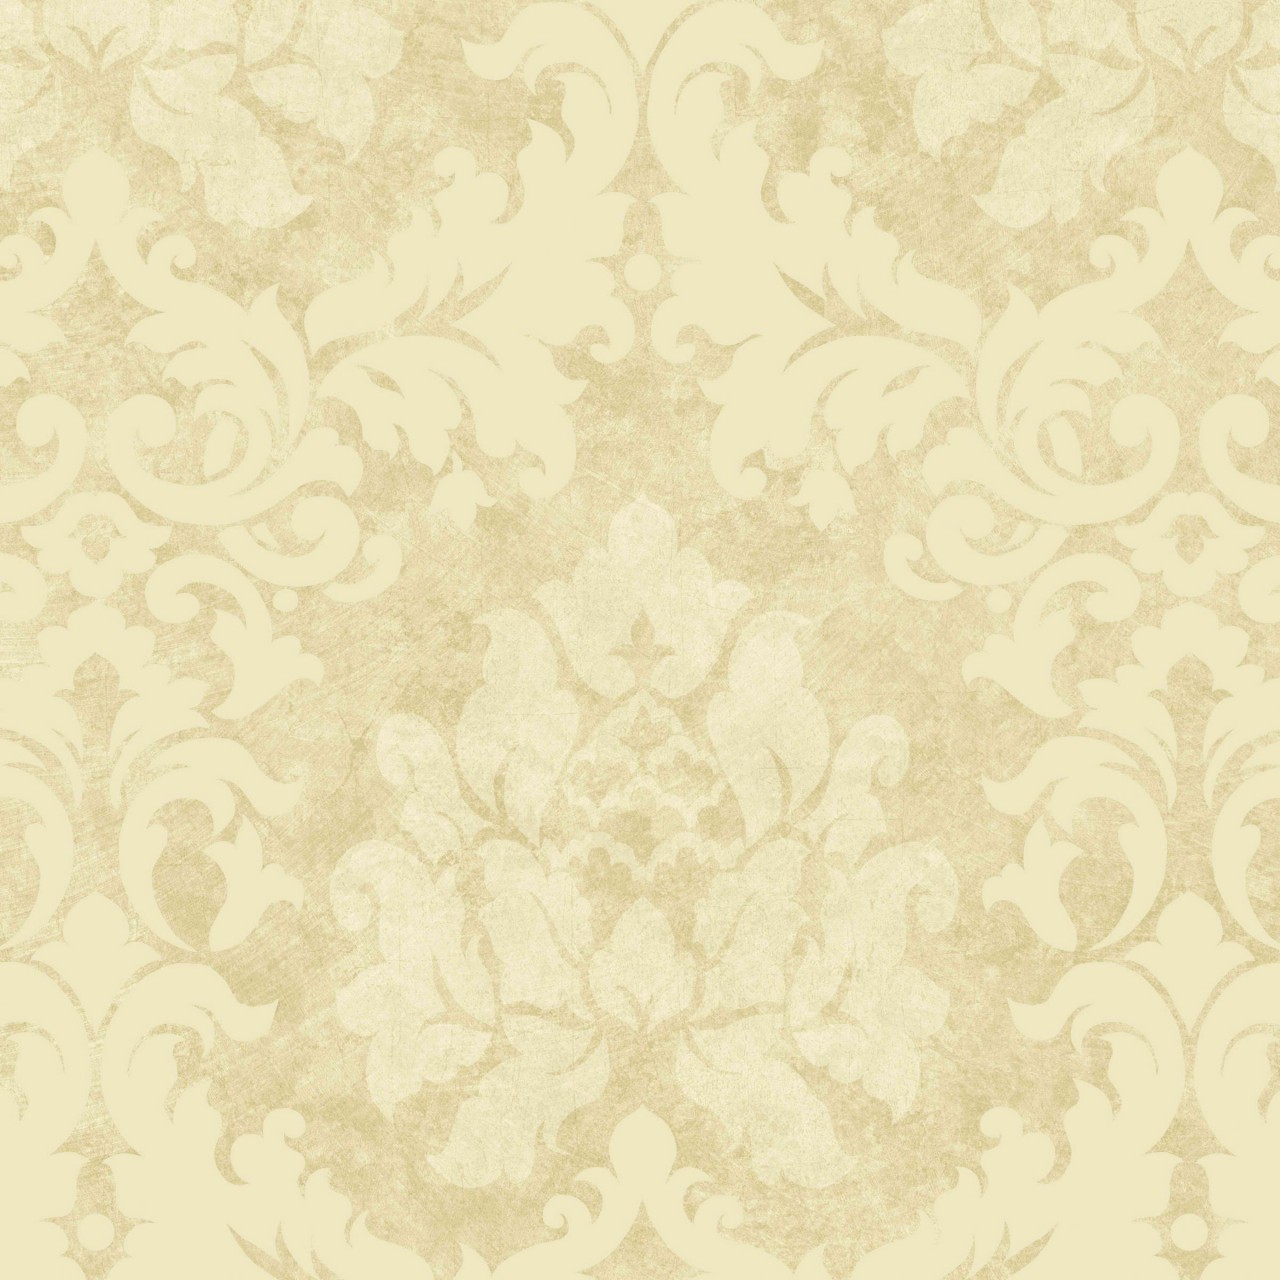 Related Pictures Two Tone Beige Wallpaper Background With Seamle